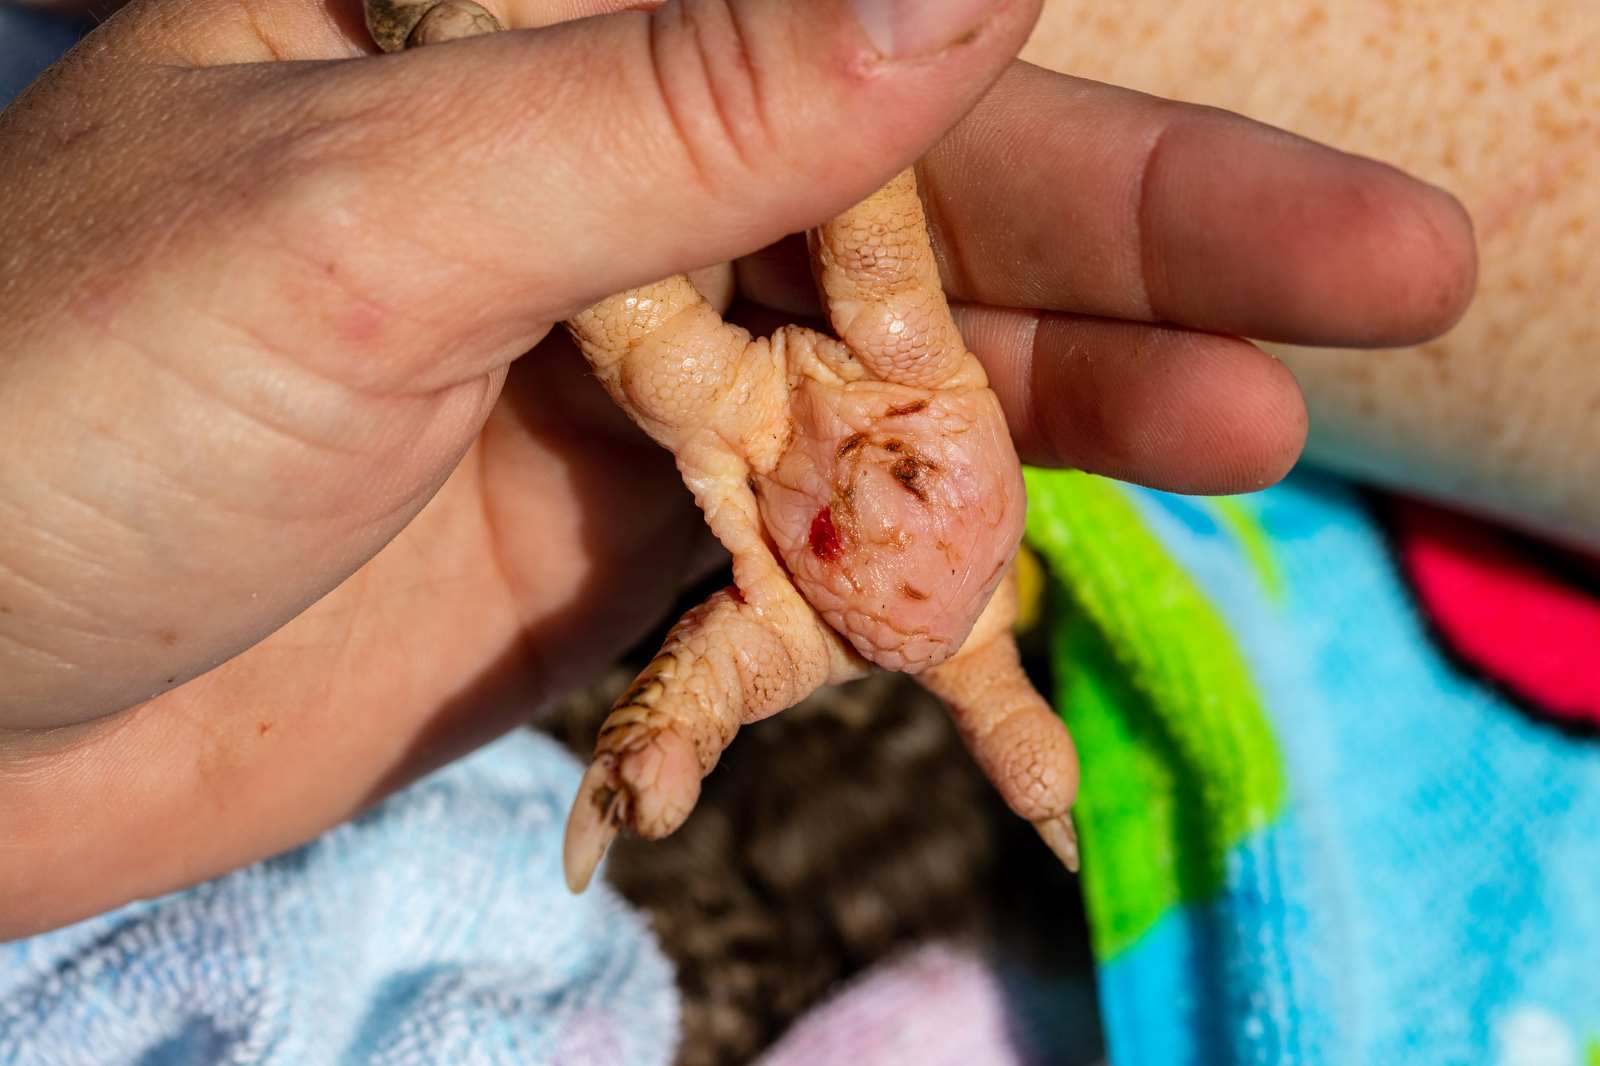 Closeup of a chicken's foot showing clear signs of Bumblefoot sores